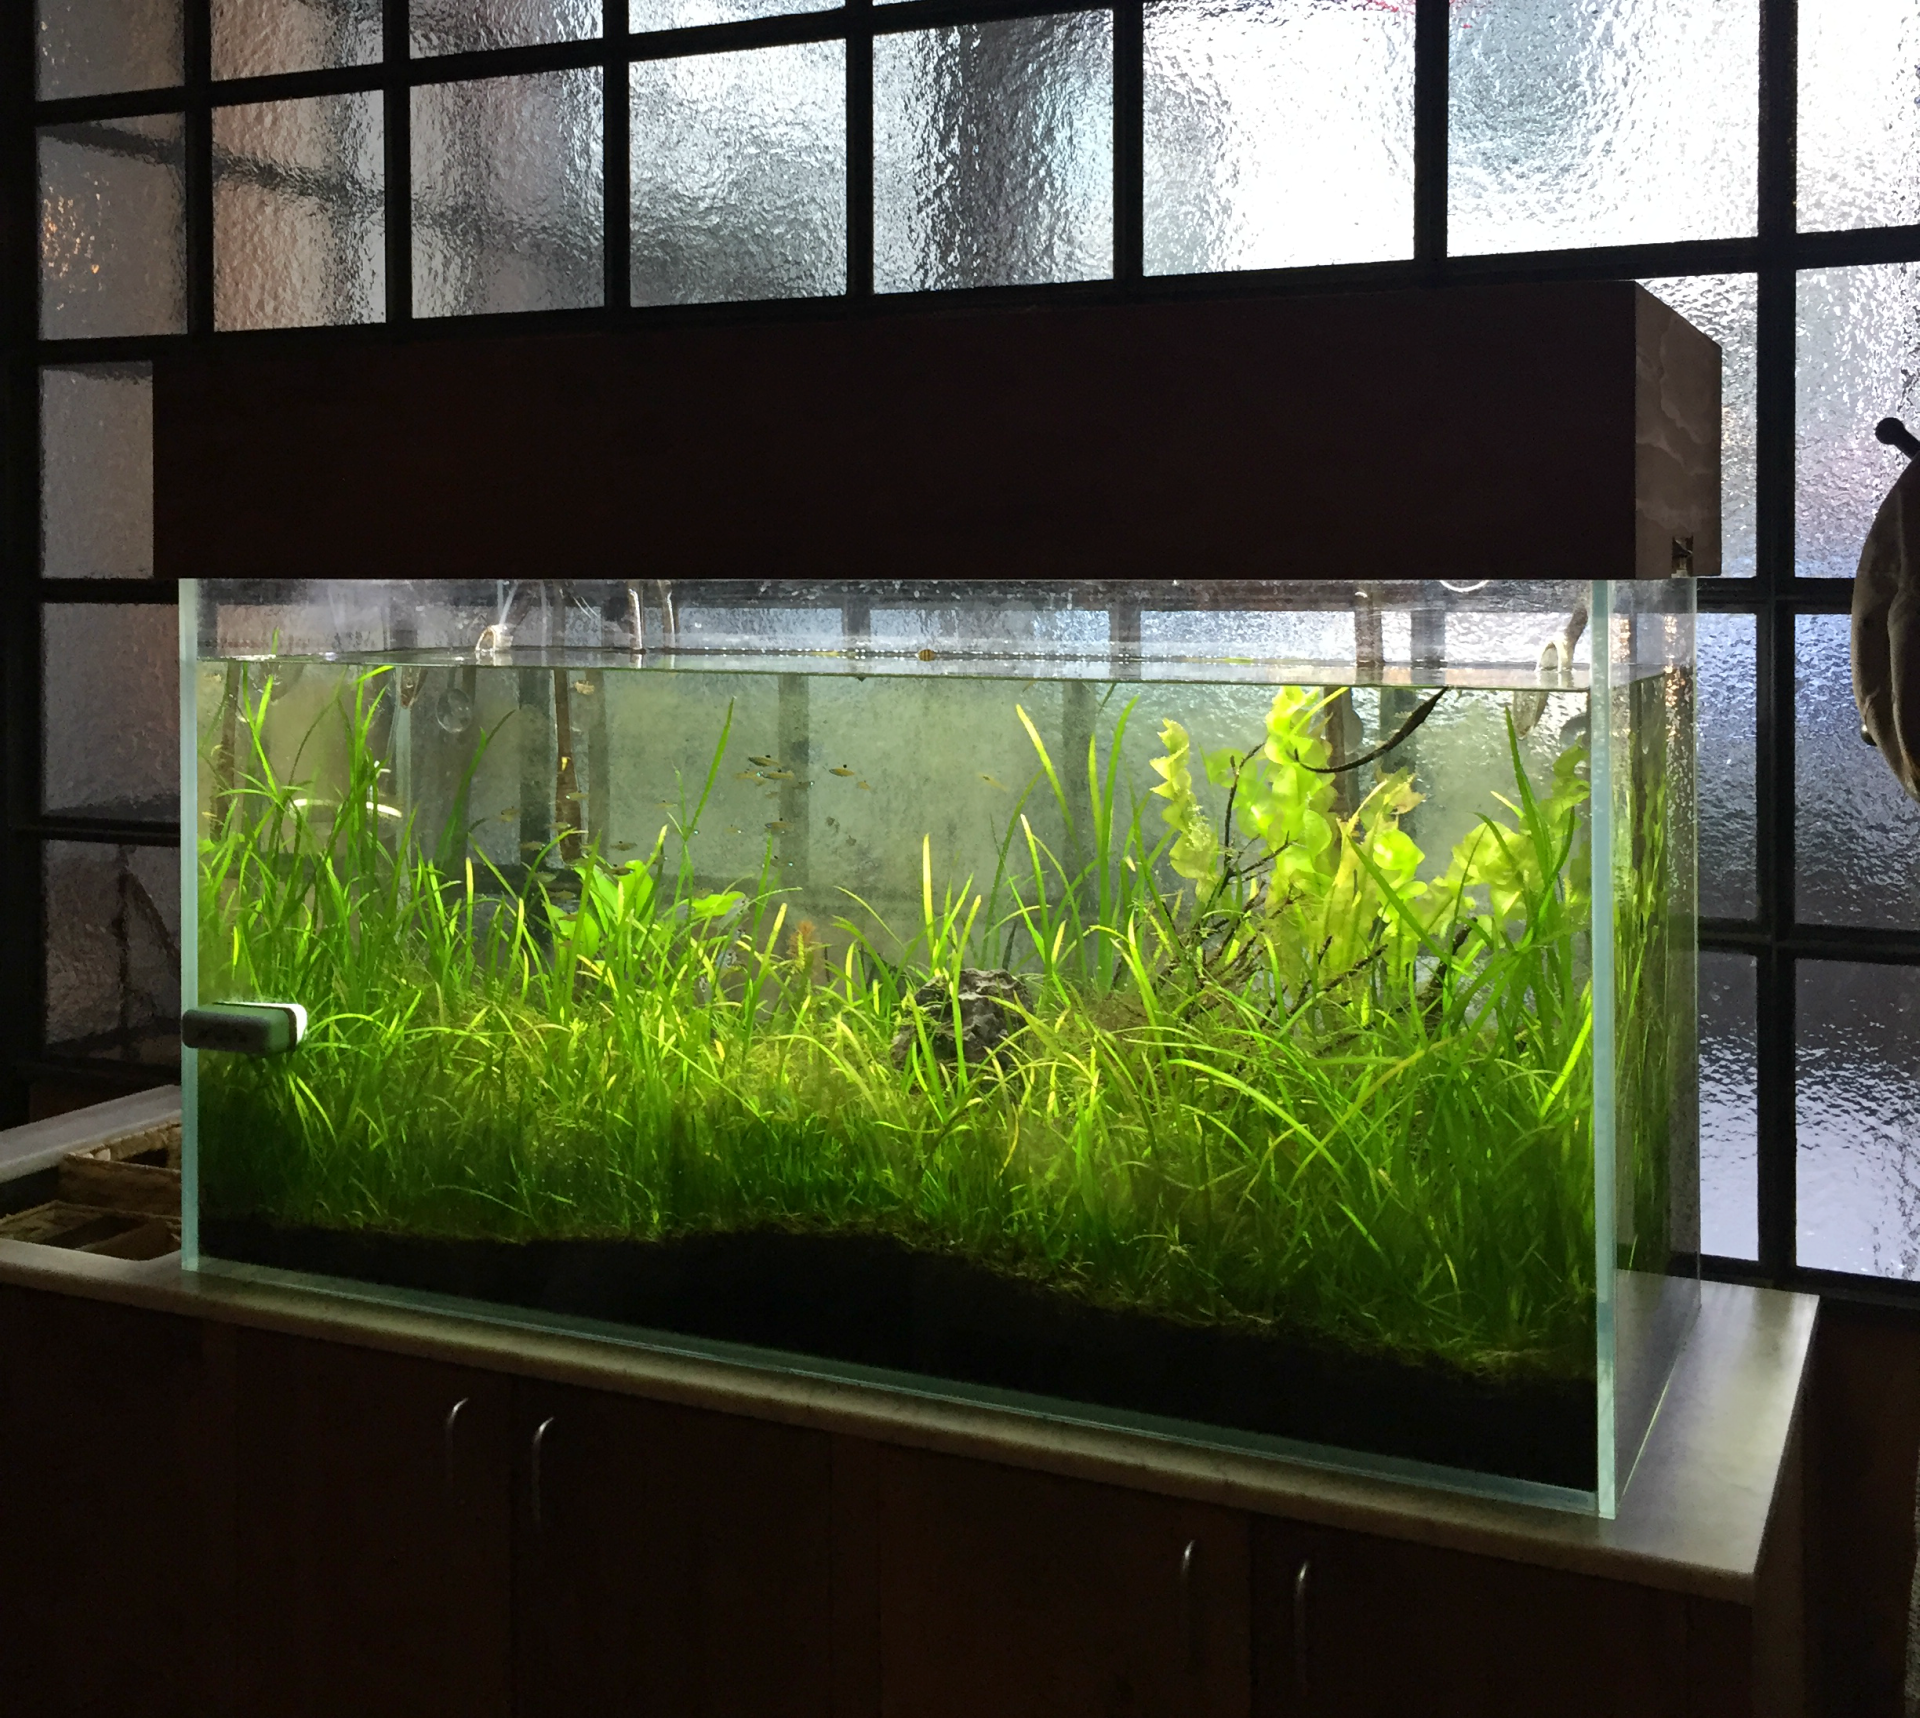 The Perennial has a small fish tank in the restaurant to demonstrate the aquaponic system they use to grow their lettuce.